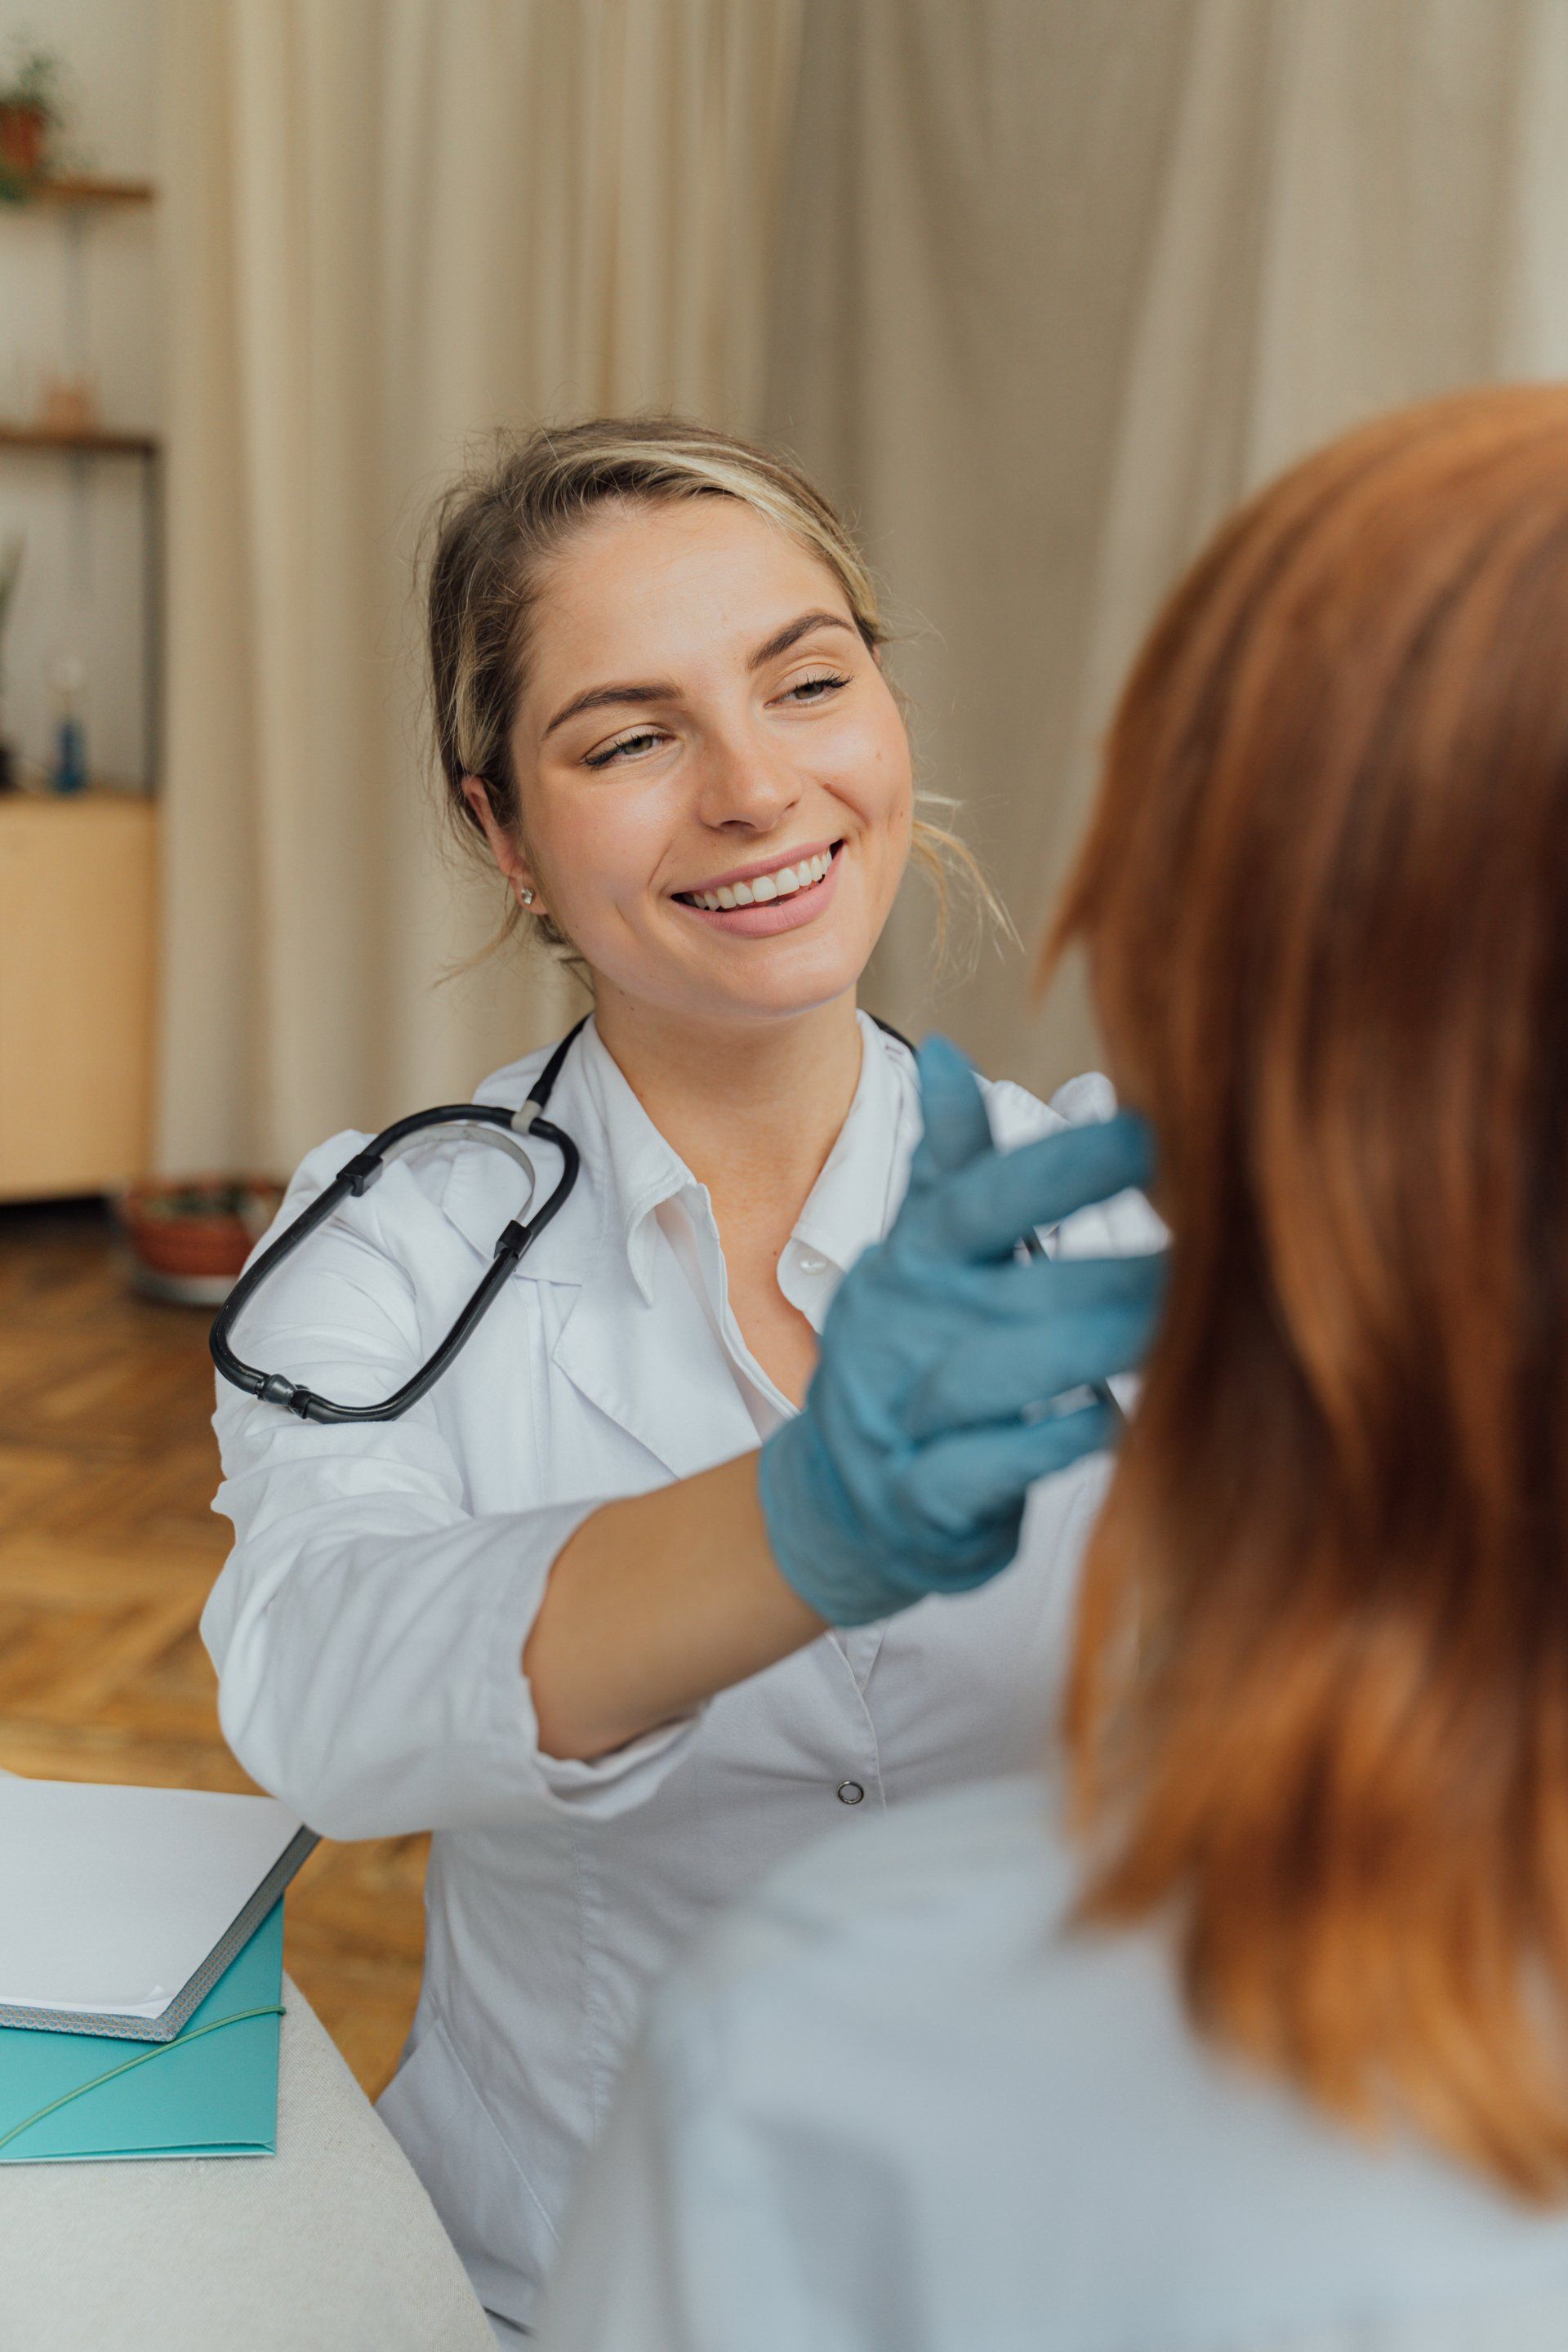 A female doctor is smiling while talking to a patient